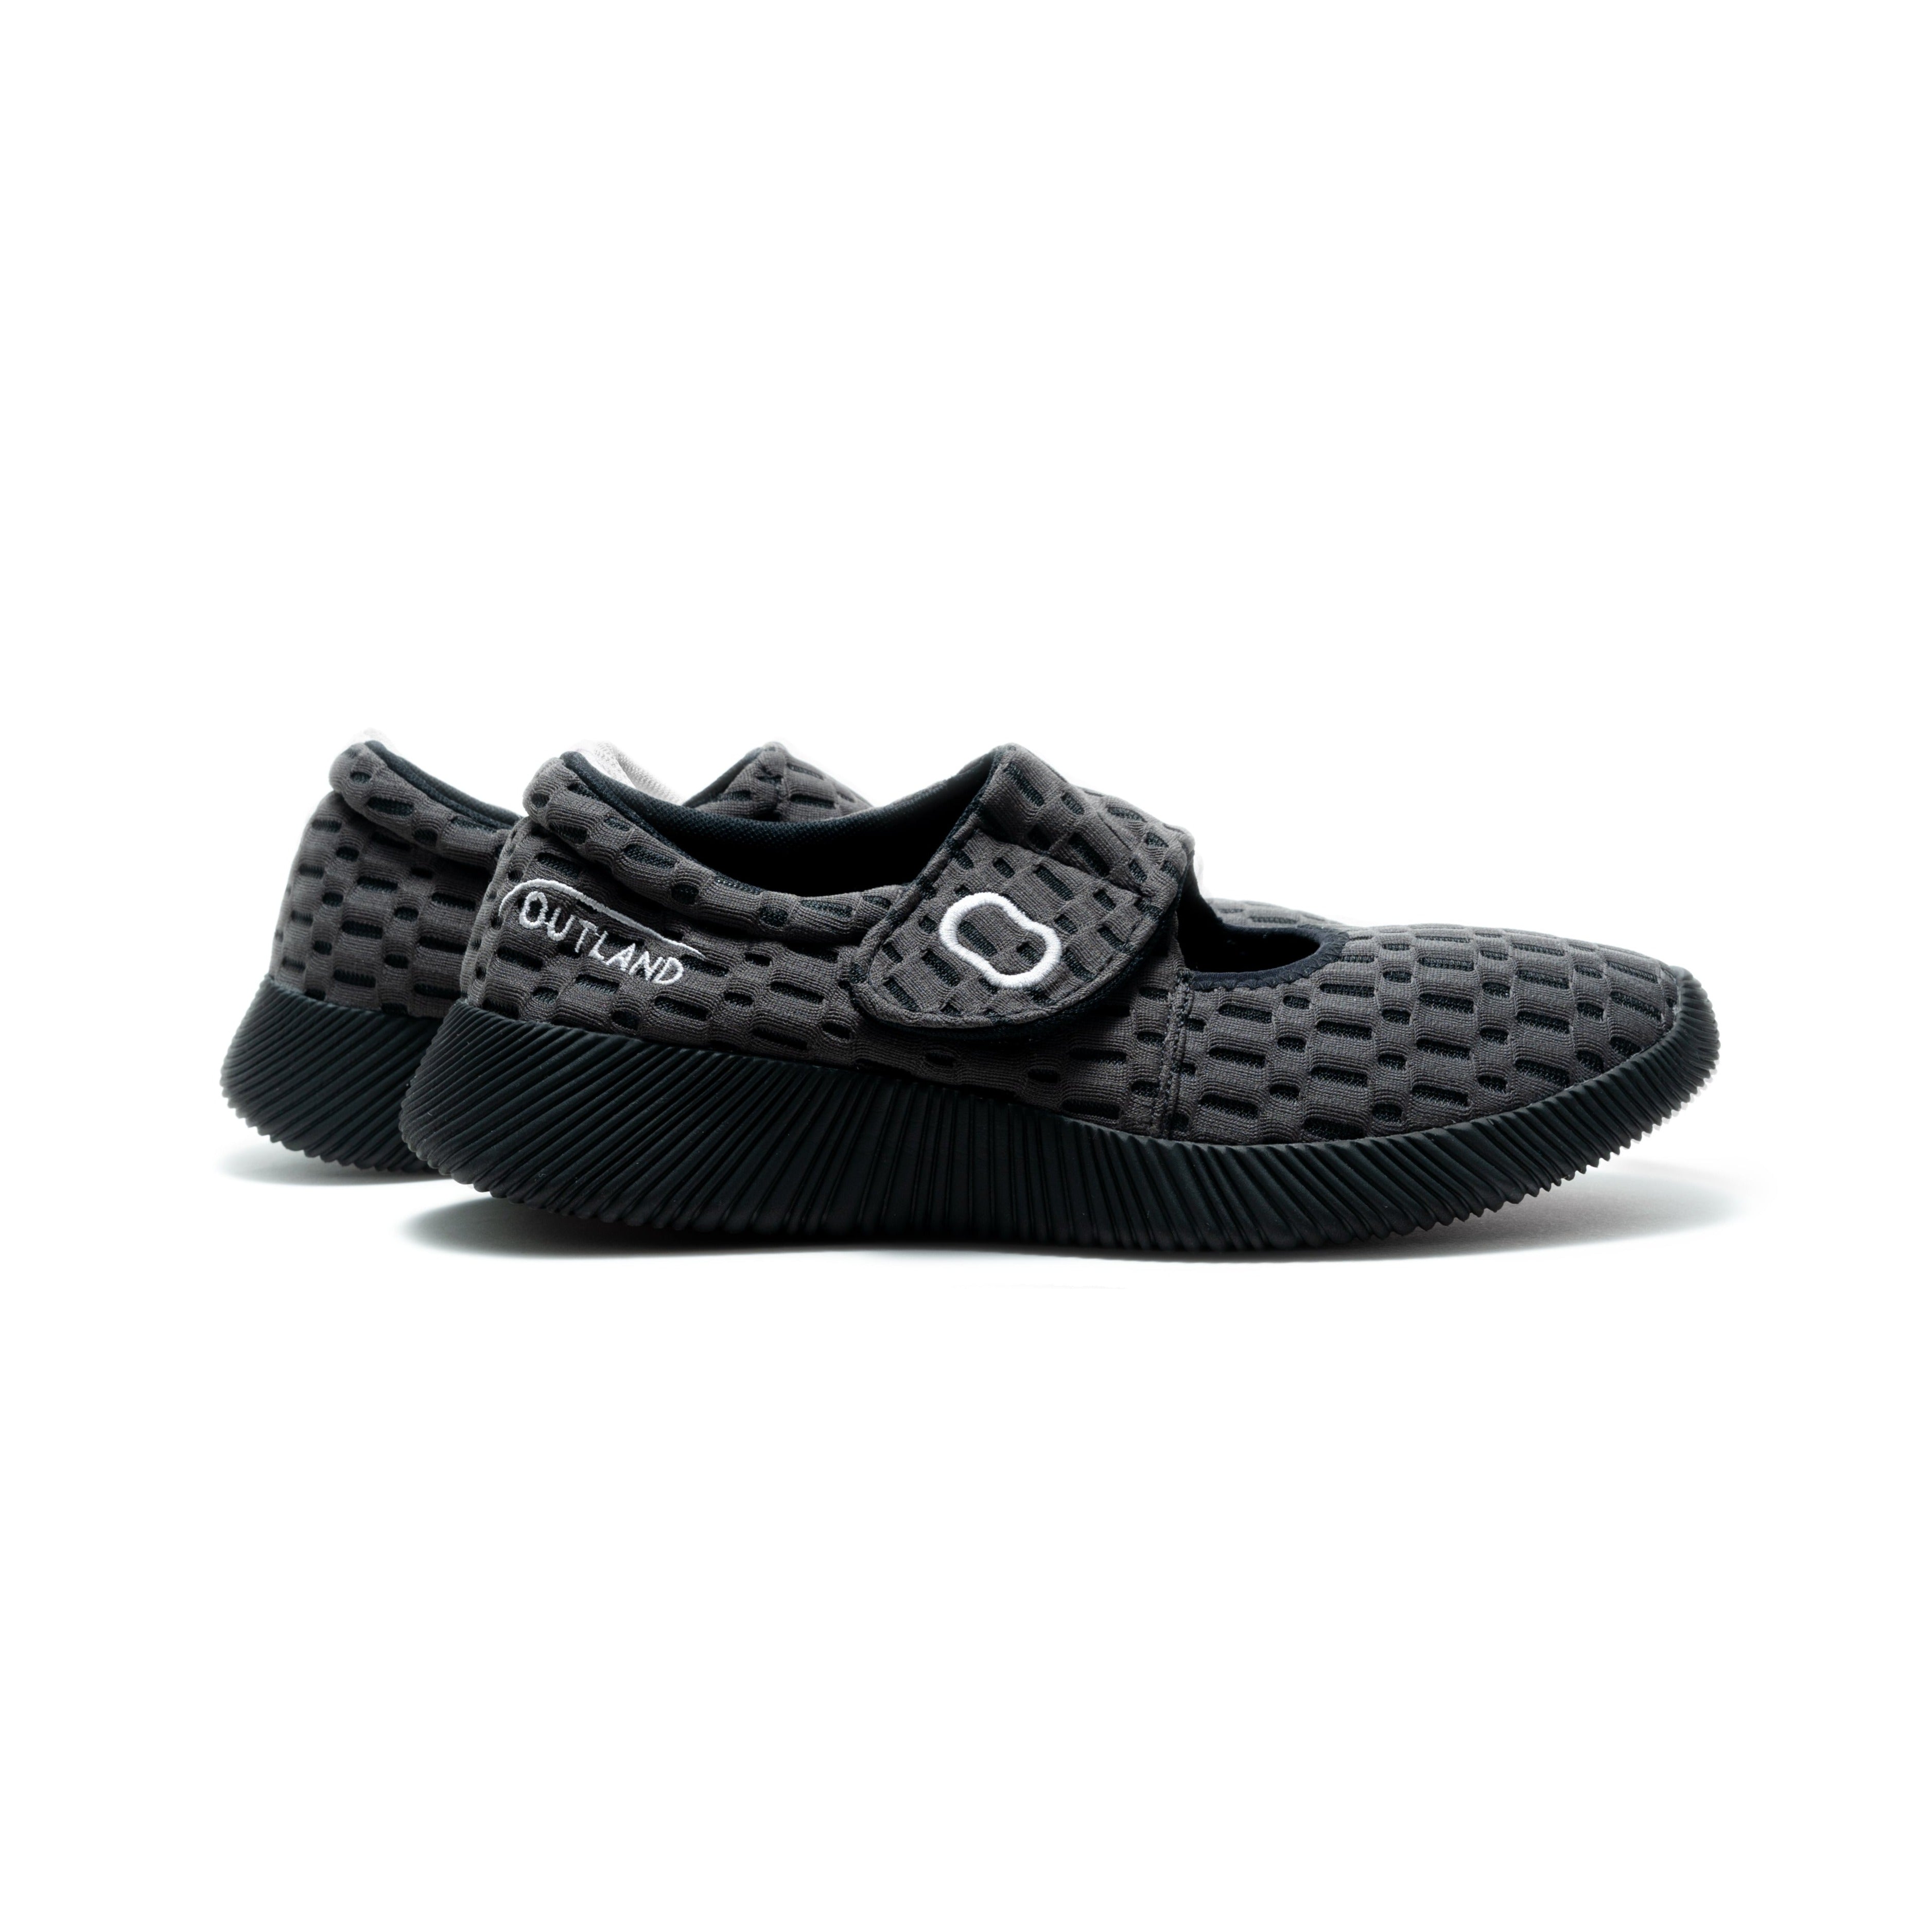 Recovery shoes Black